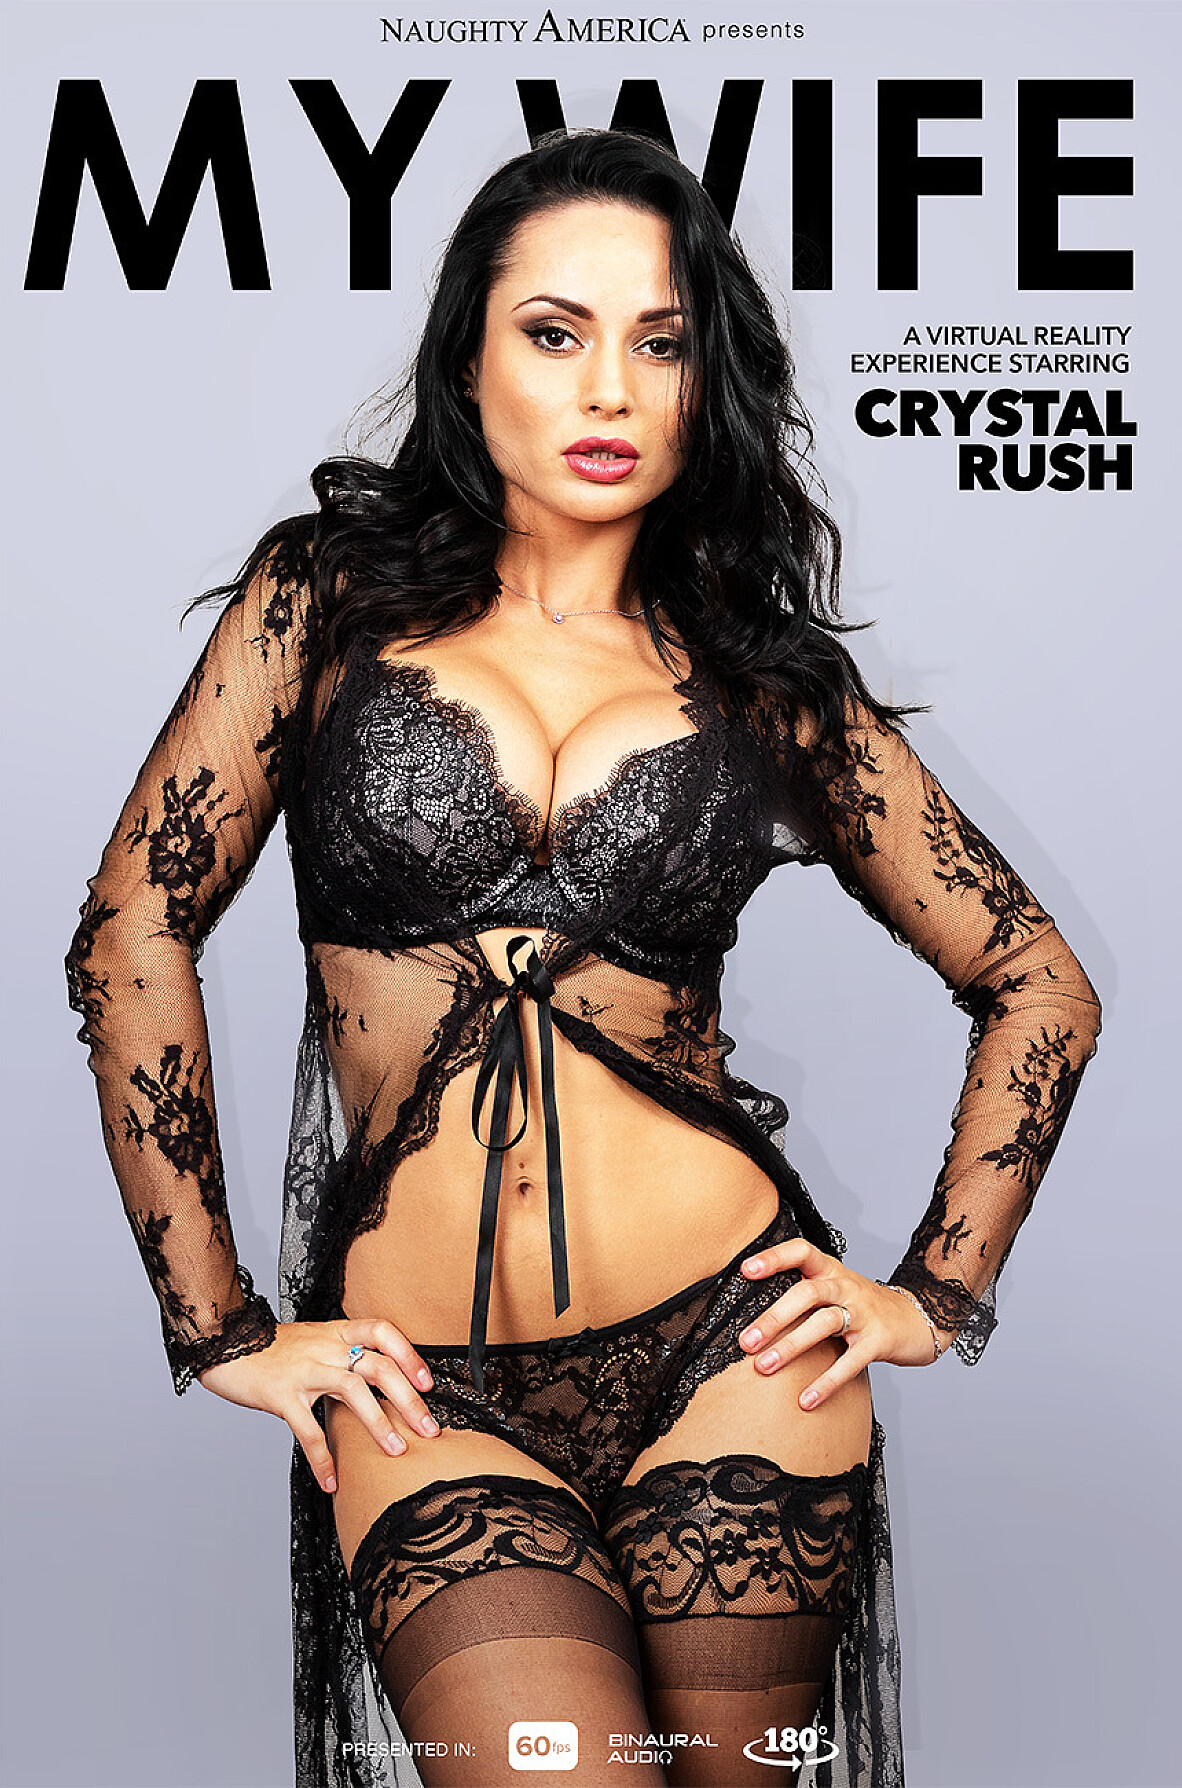 Watch Crystal Rush and Brad Sterling VR video in Naughty America